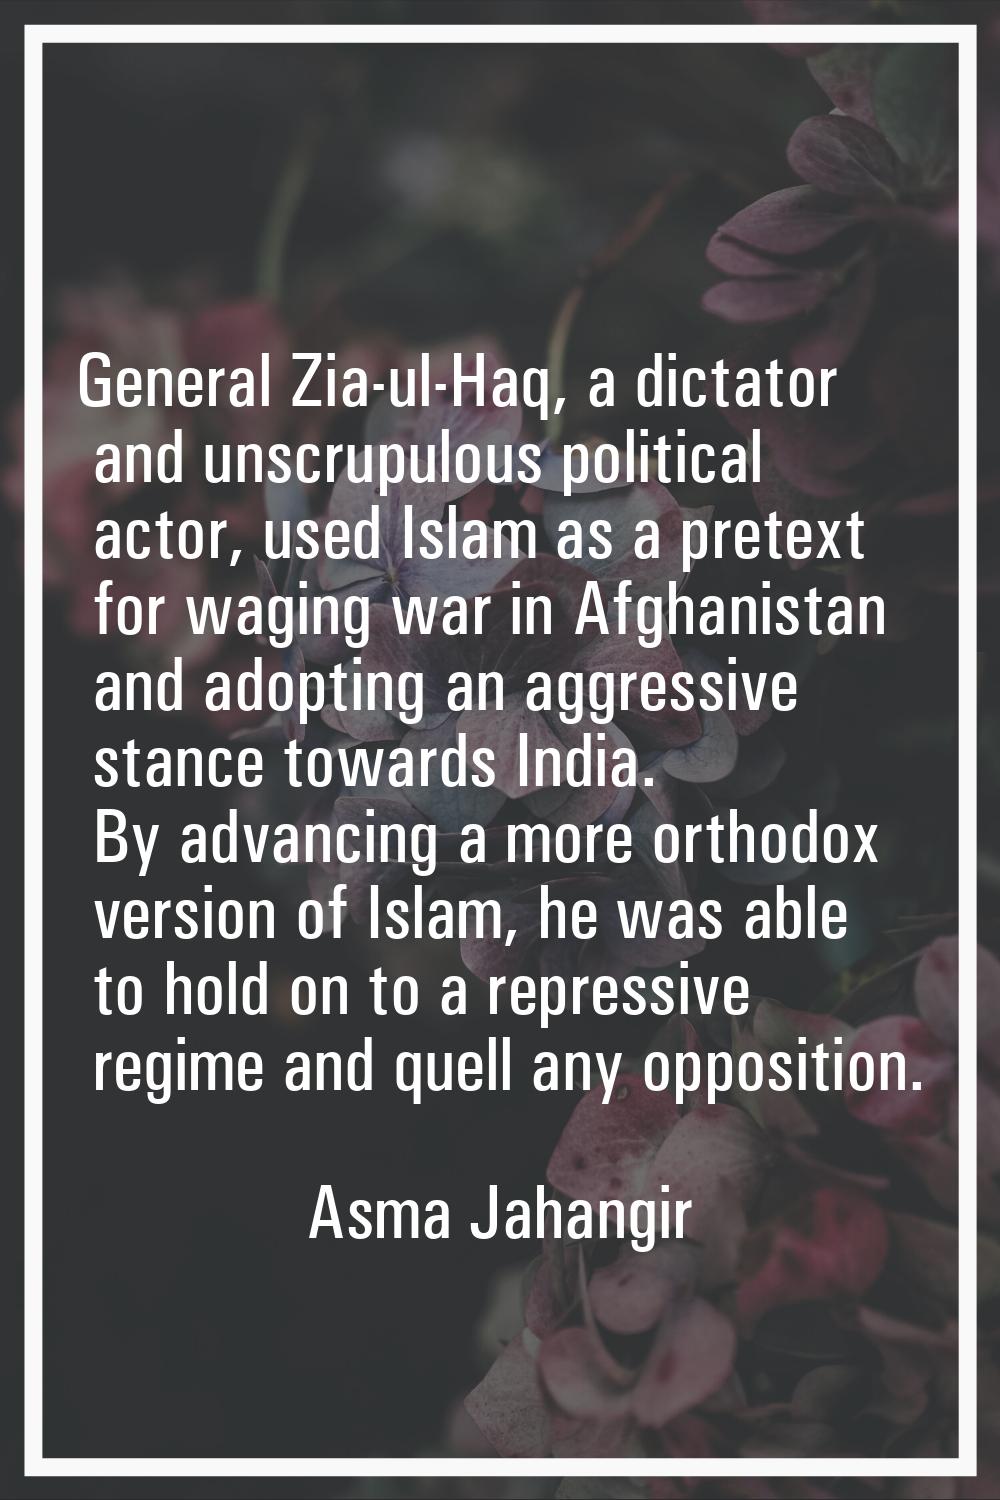 General Zia-ul-Haq, a dictator and unscrupulous political actor, used Islam as a pretext for waging